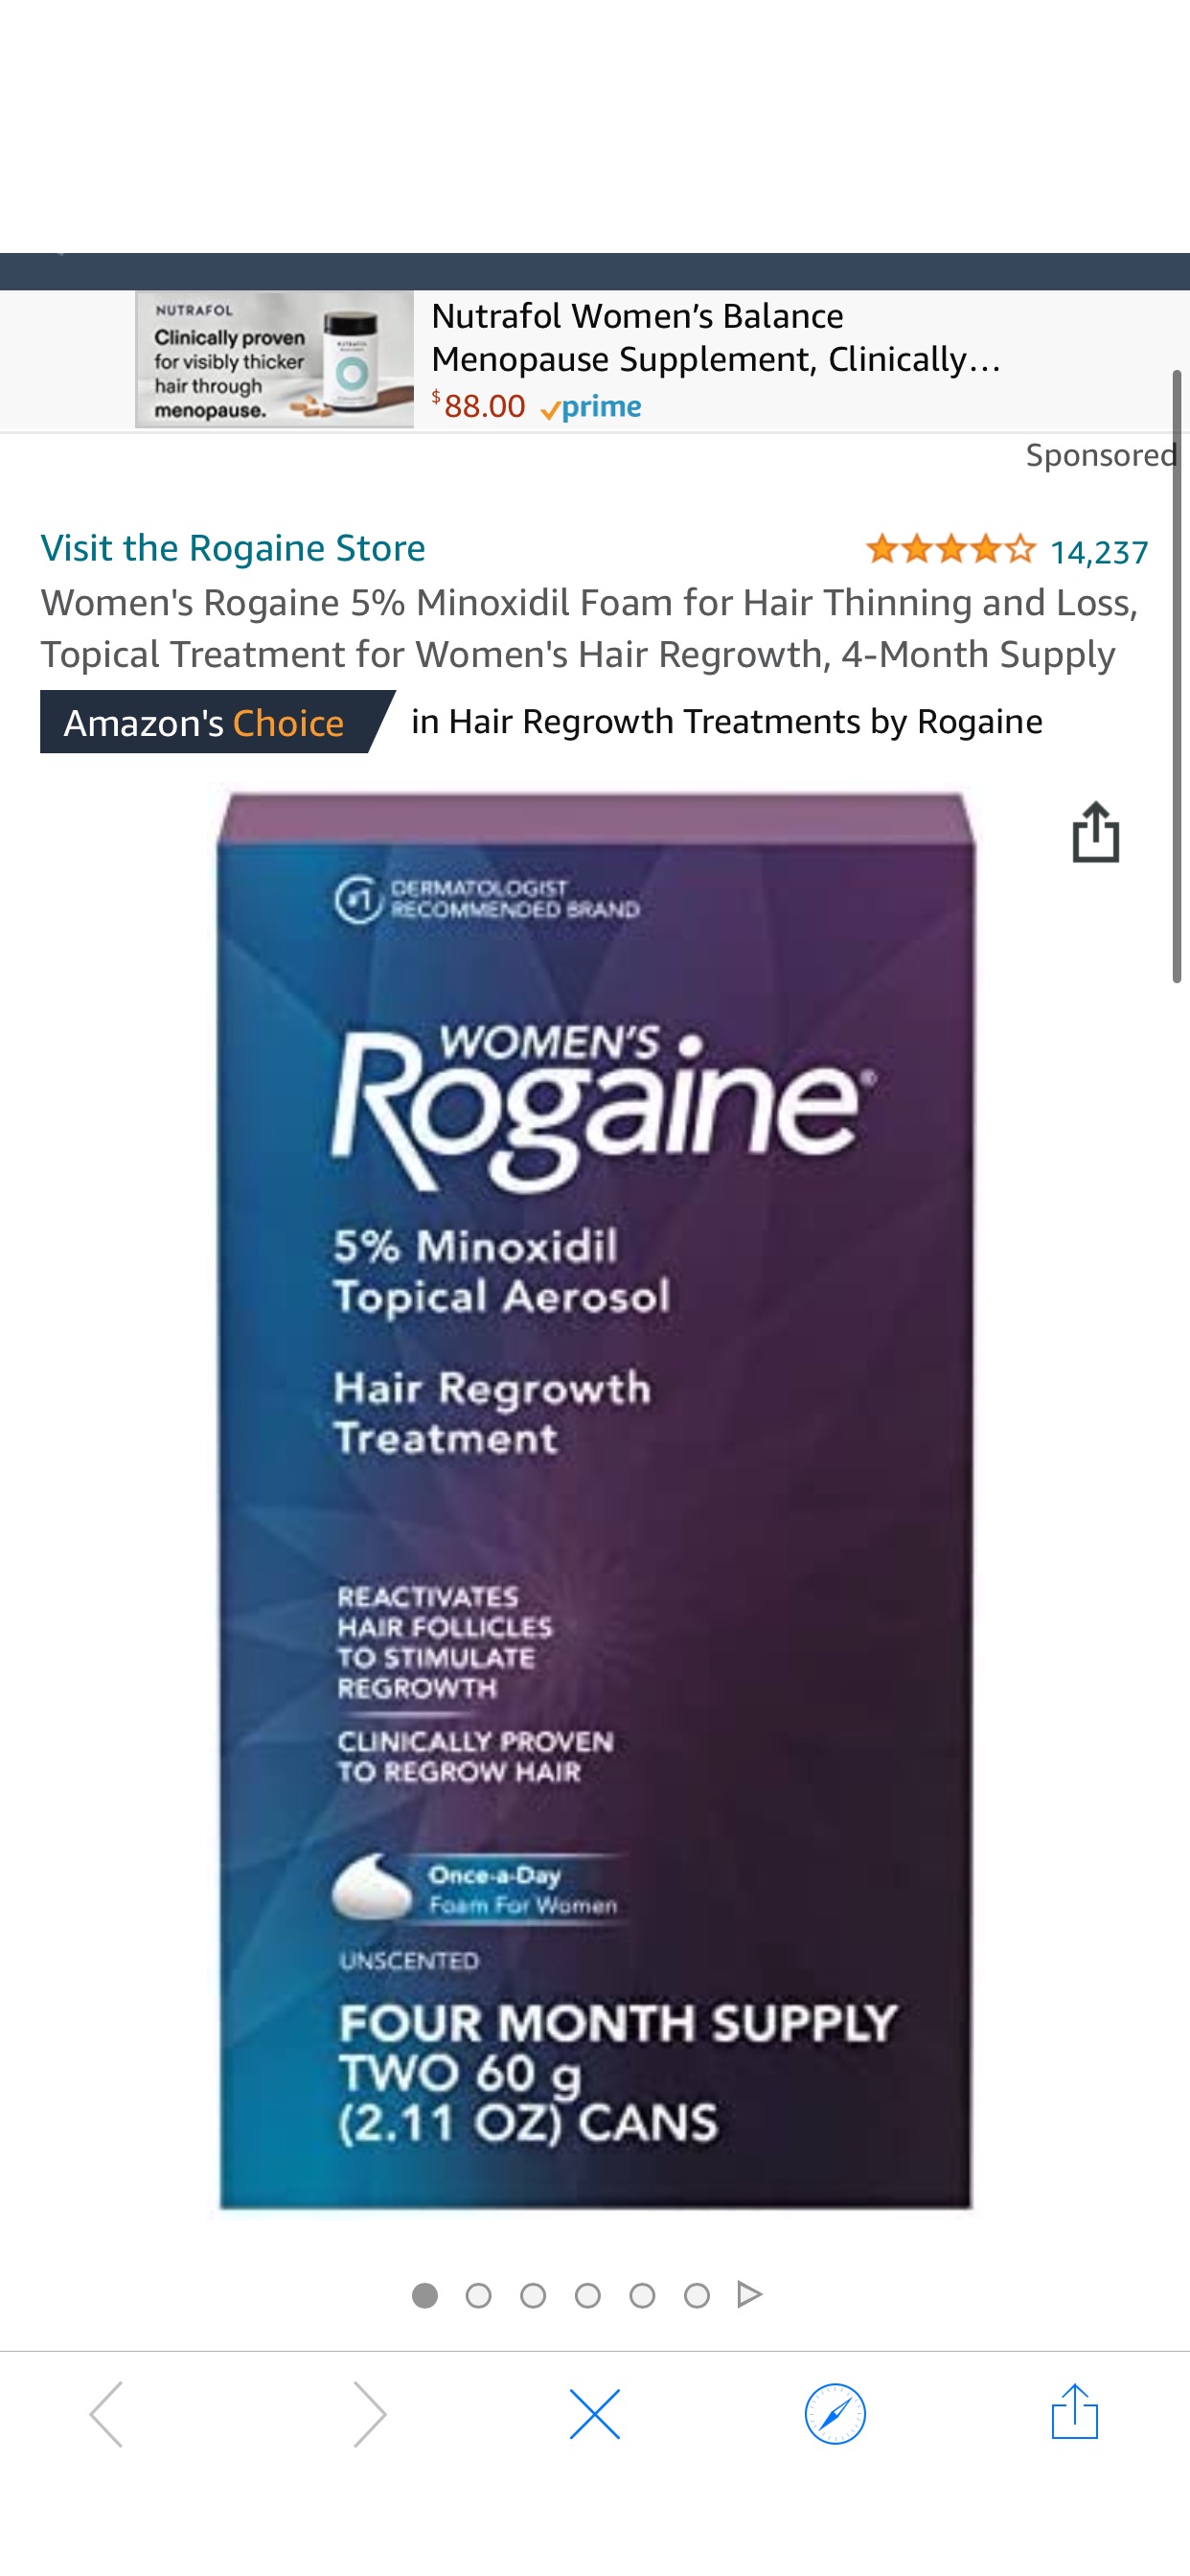 Amazon.com : Women's Rogaine 5% Minoxidil Foam for Hair Thinning and Loss, Topical Treatment for Women's Hair Regrowth, 4-Month Supply : Beauty & Personal Care